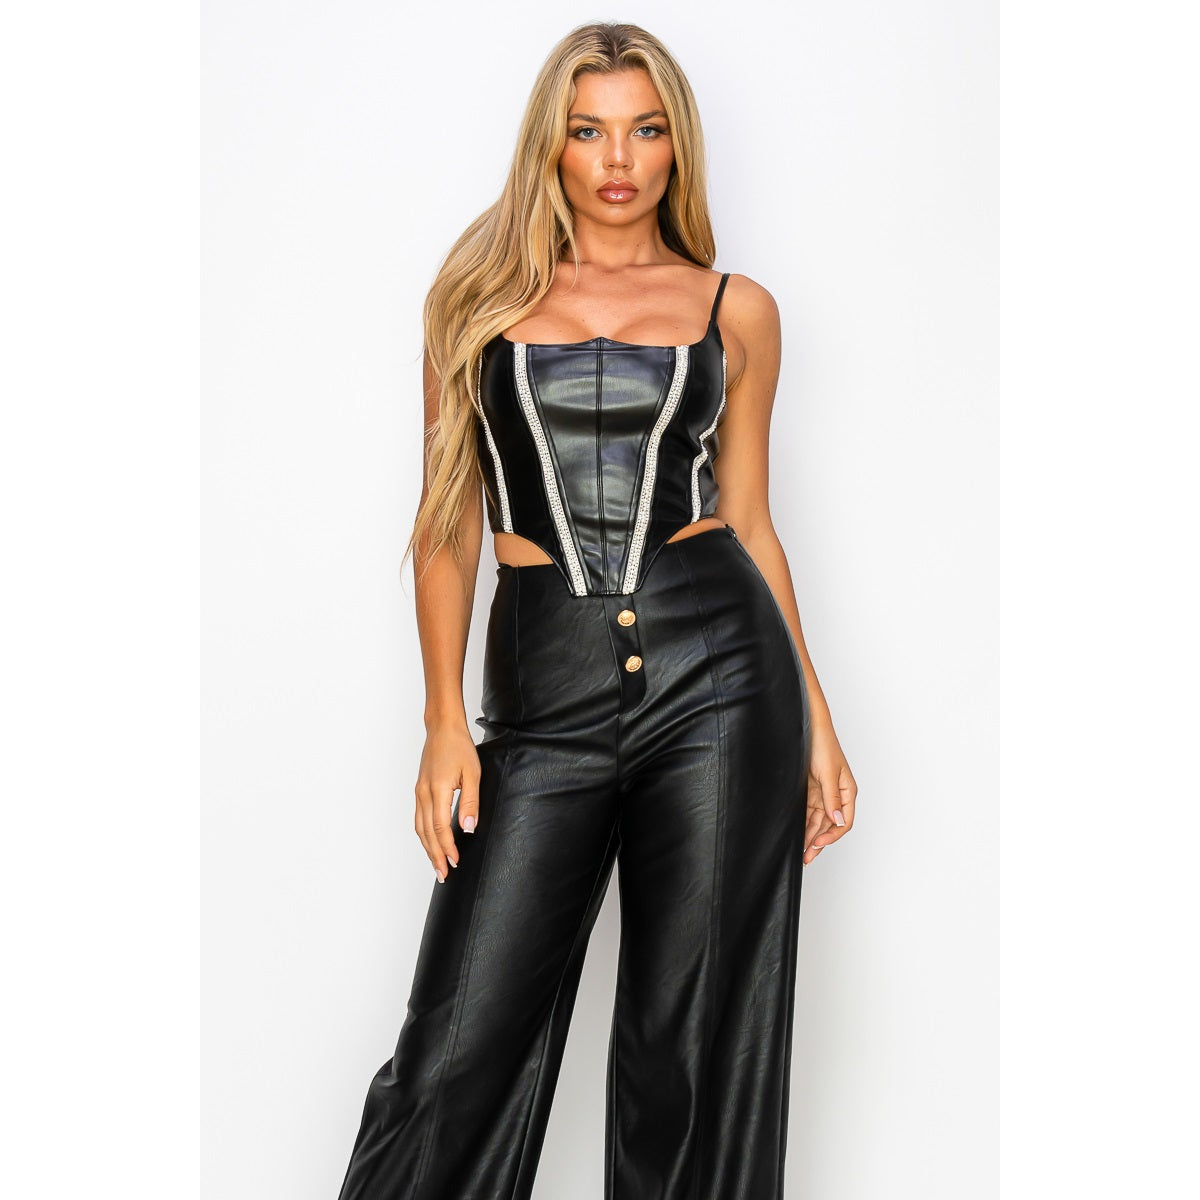 FAUX LEATHER RHINESTONE CORSET TOP – Hiddengypsyboutique